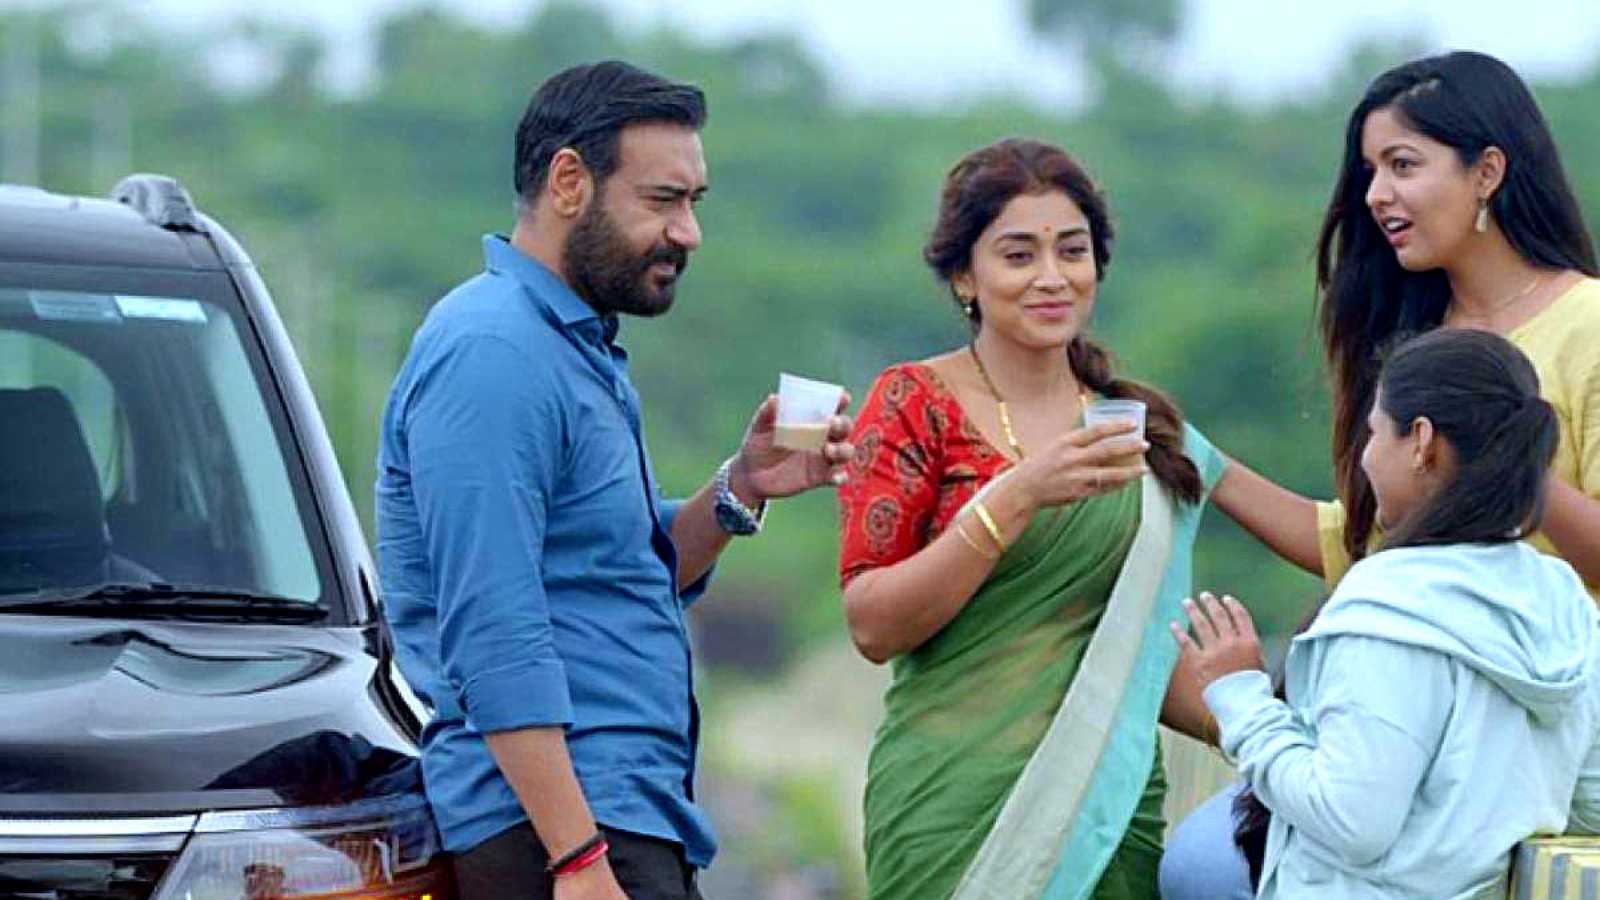 Ajay Devgn-Tabu starrer Drishyam 2 swims past Rs 100 crore in first week, mystery finds new takers